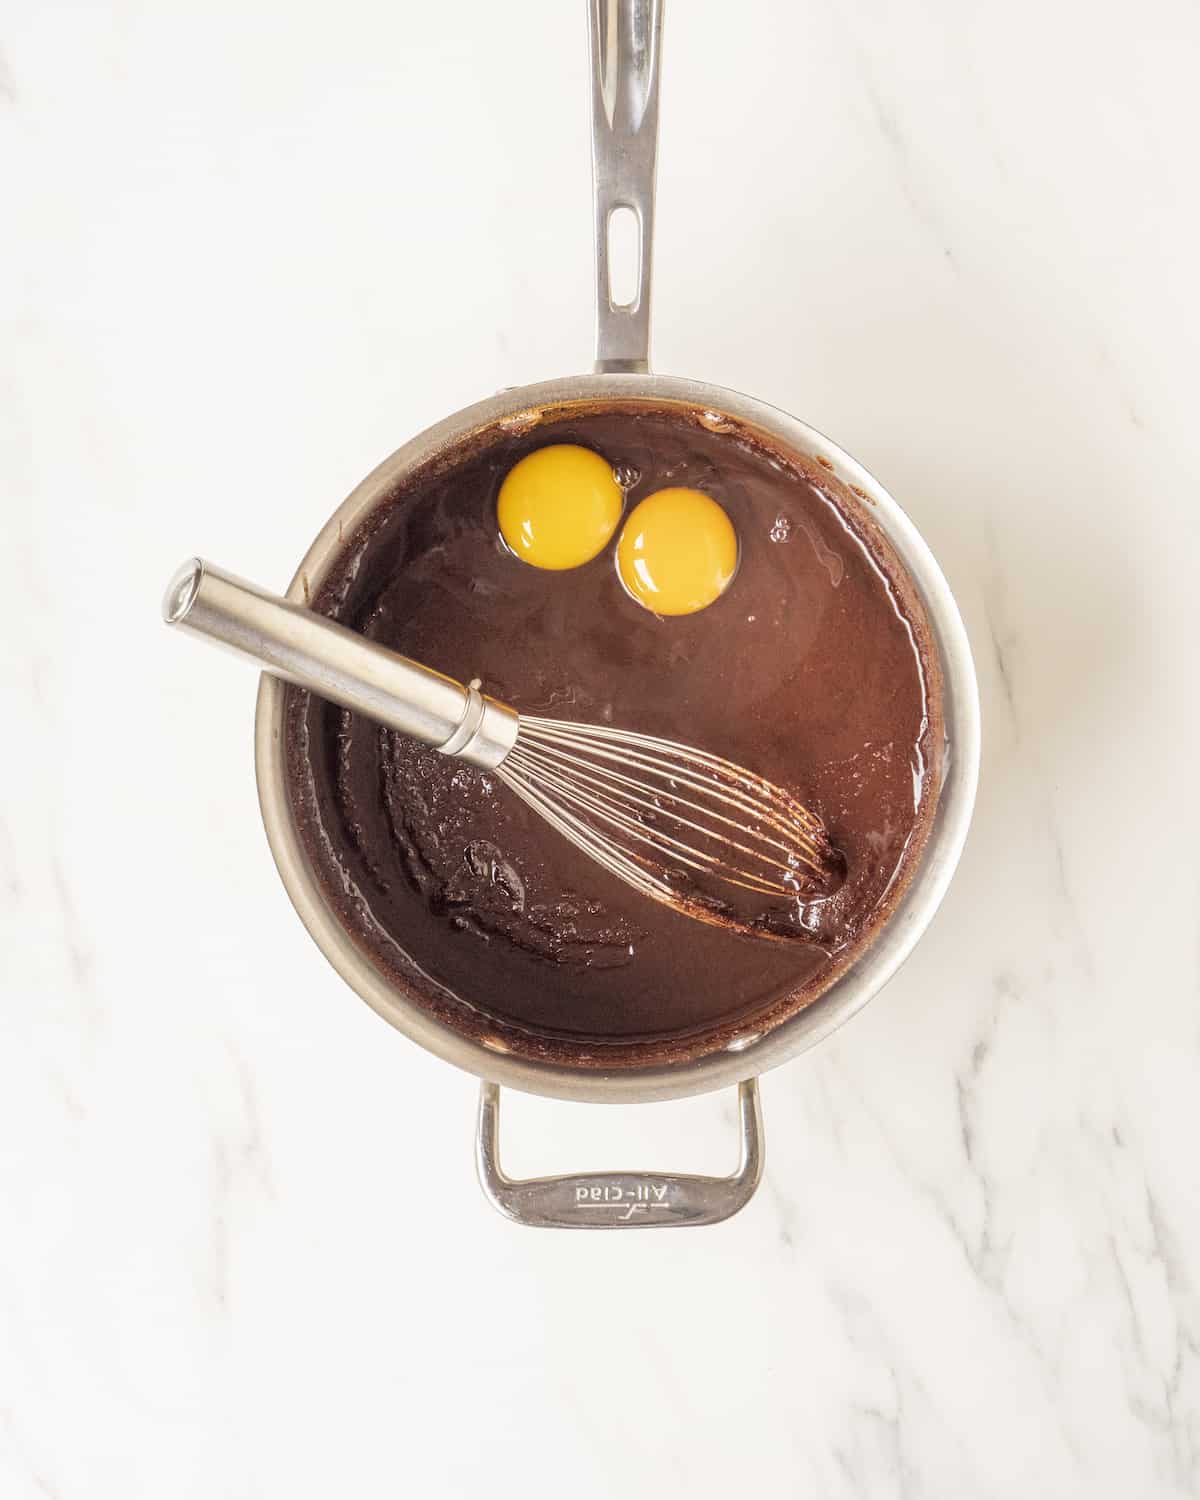 A pot filled with brownie batter and 2 eggs.  